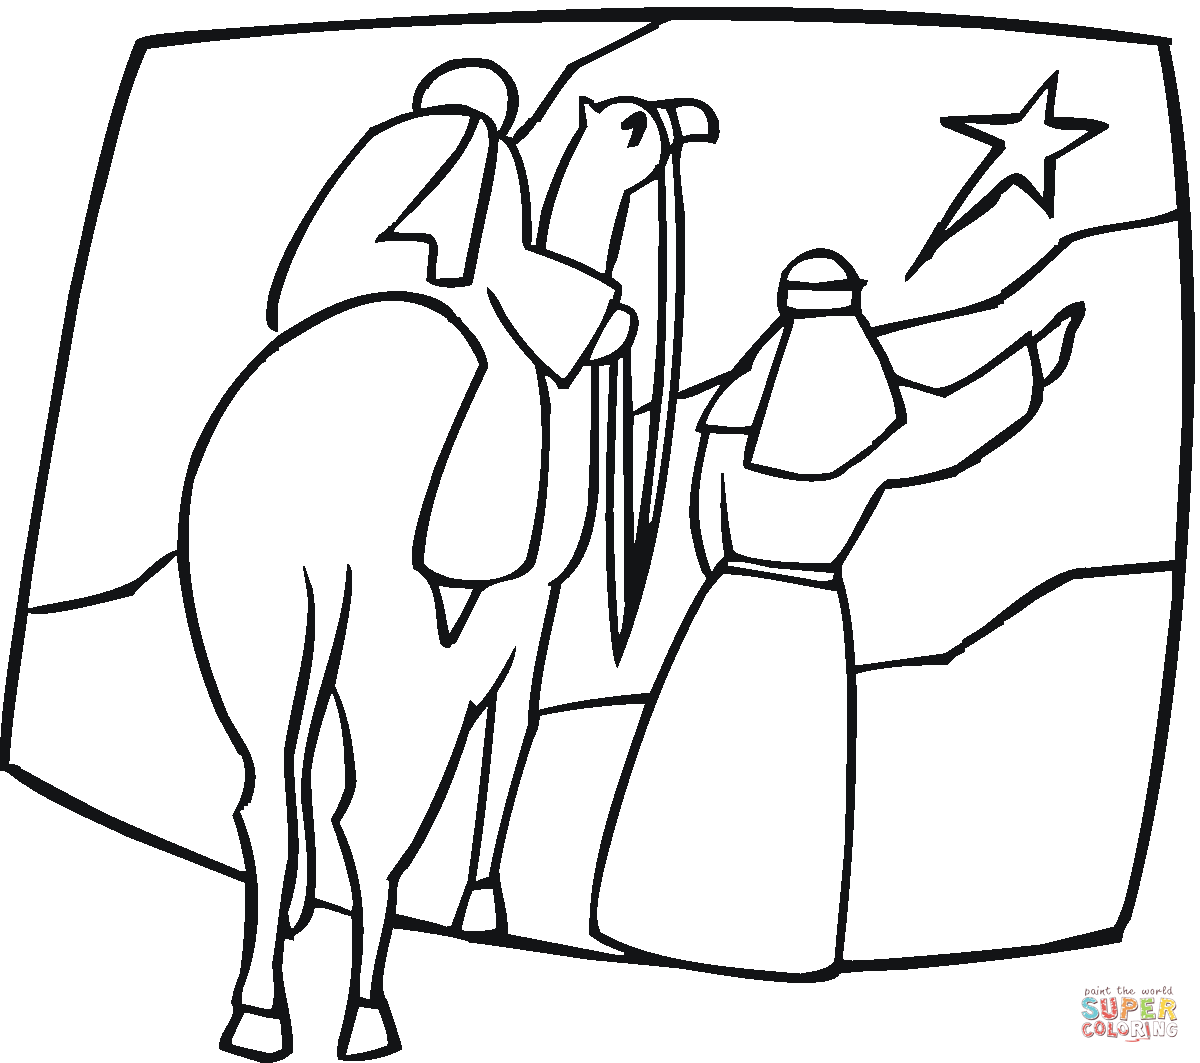 Kings on the camel are pointing at christmas star coloring page free printable coloring pages